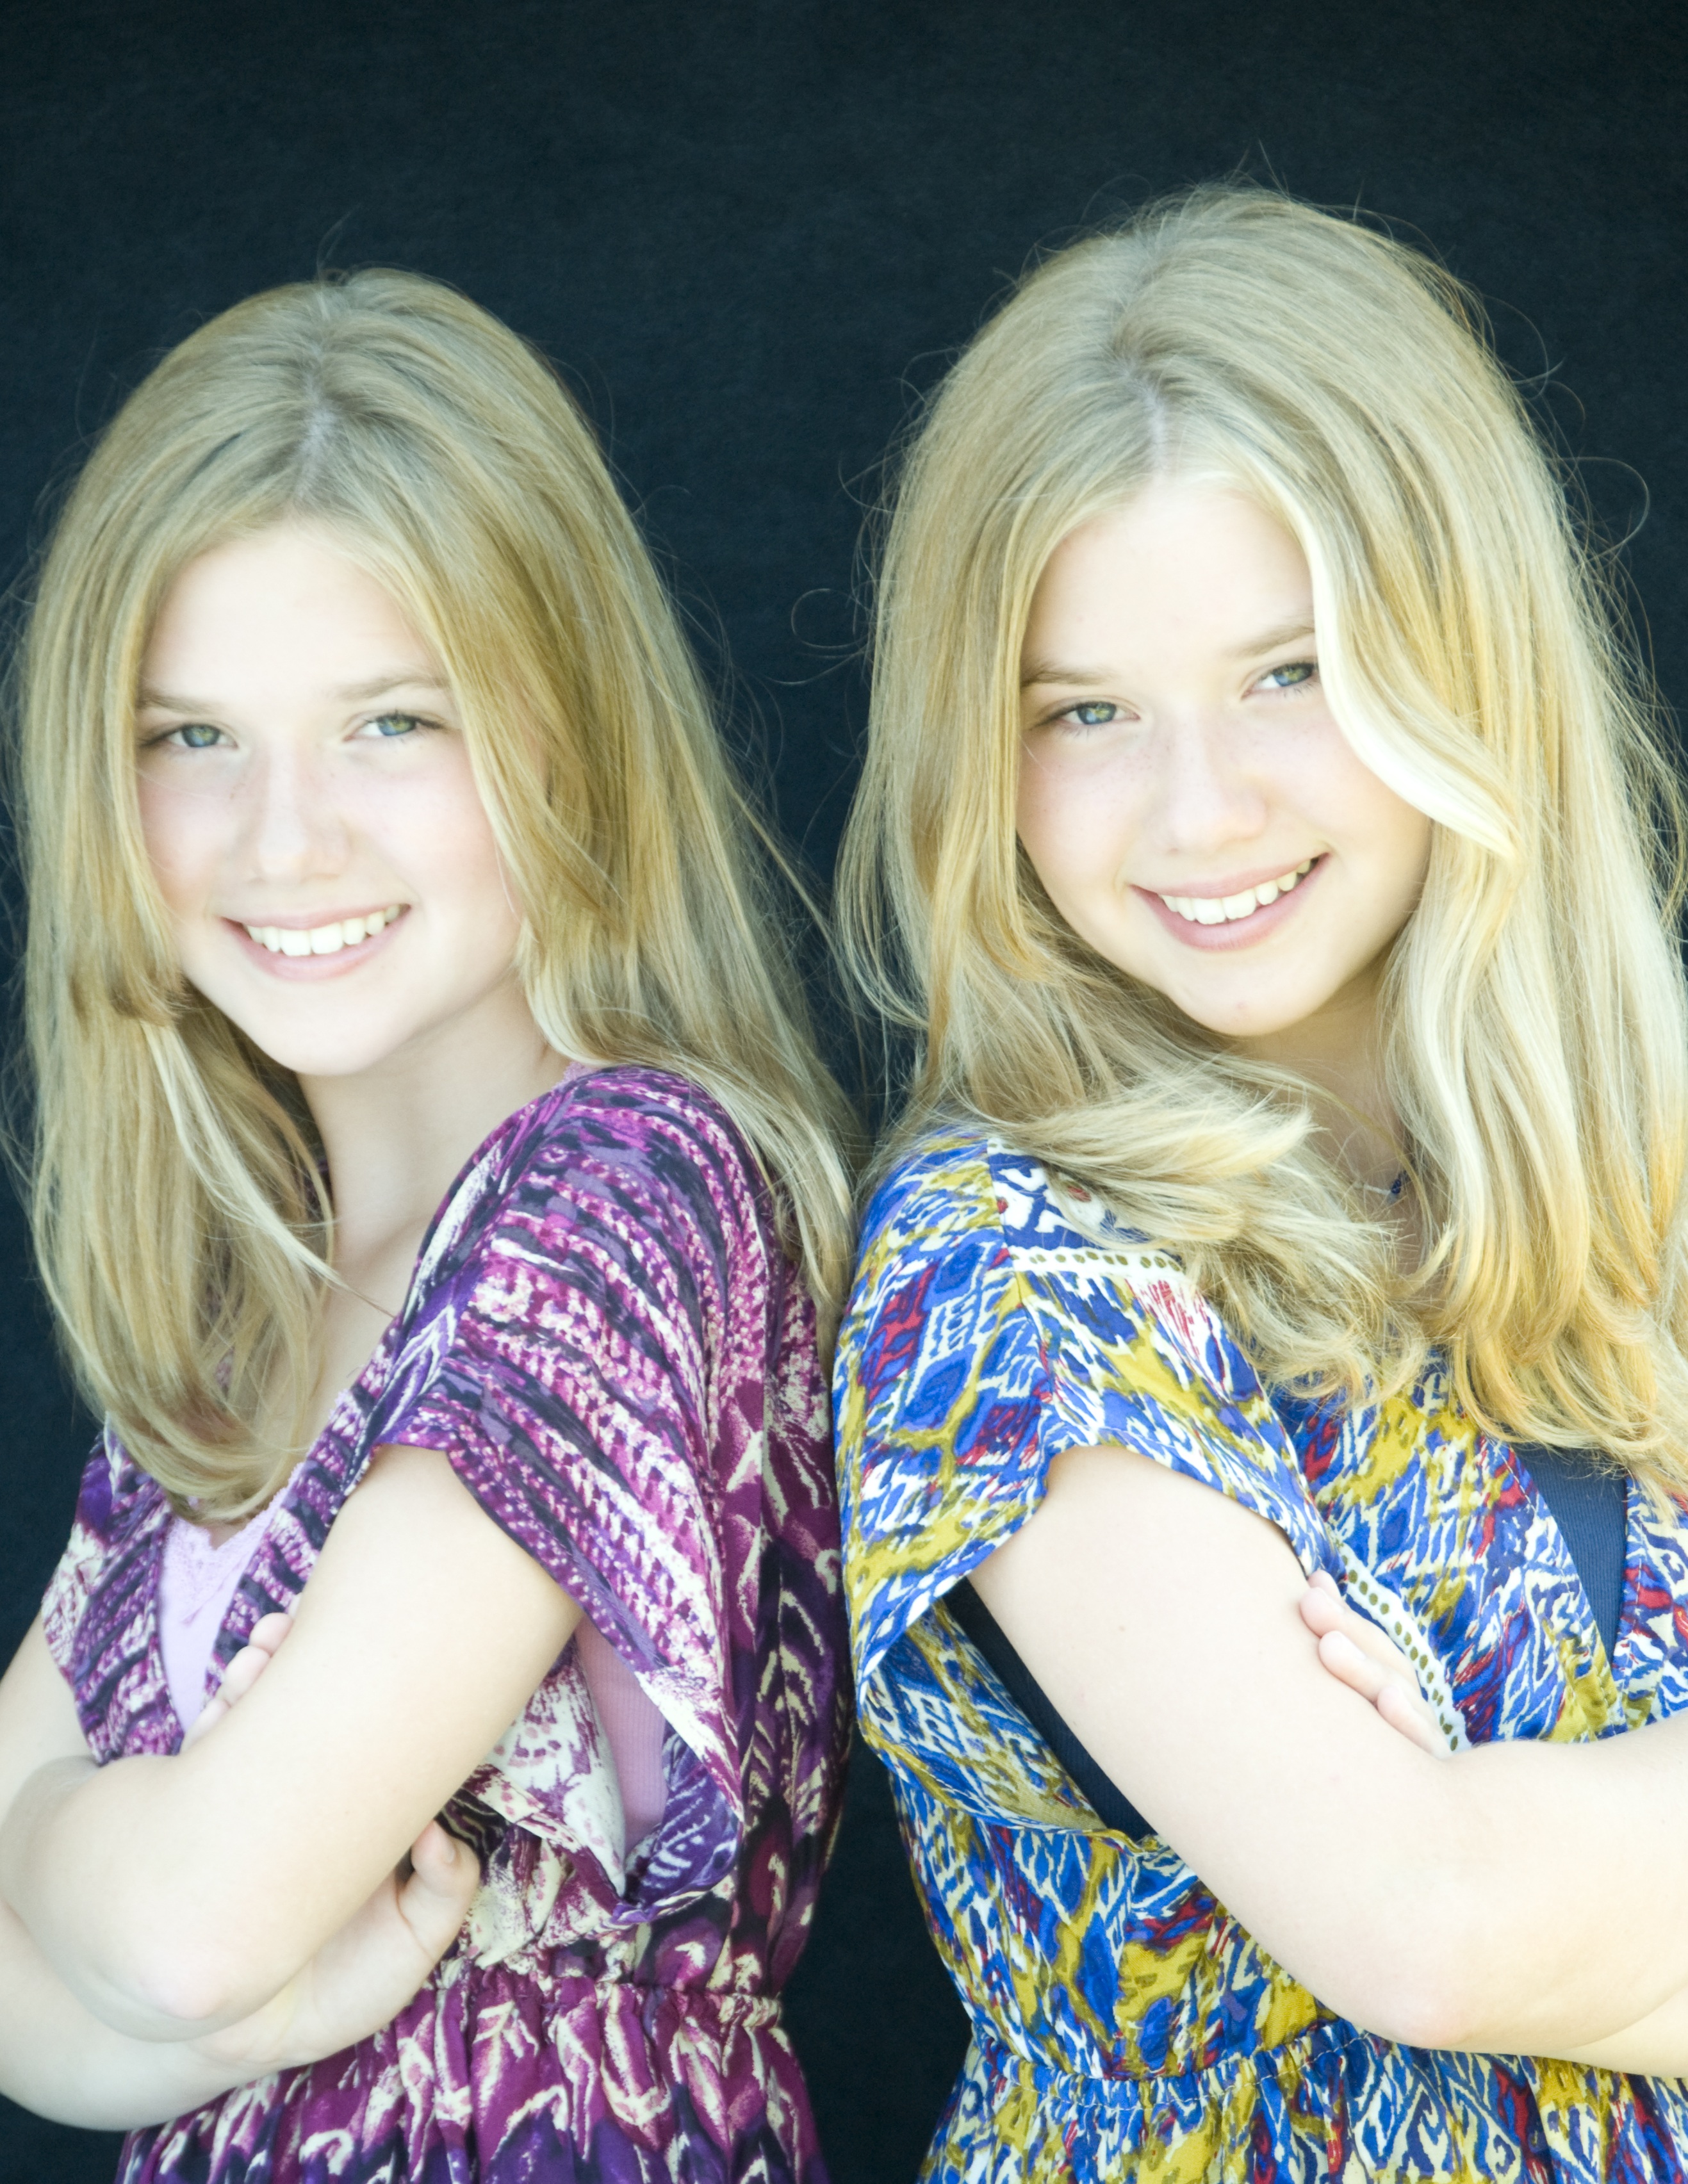 Cailin Loesch (right) and her twin sister Hannah Loesch in 2011.